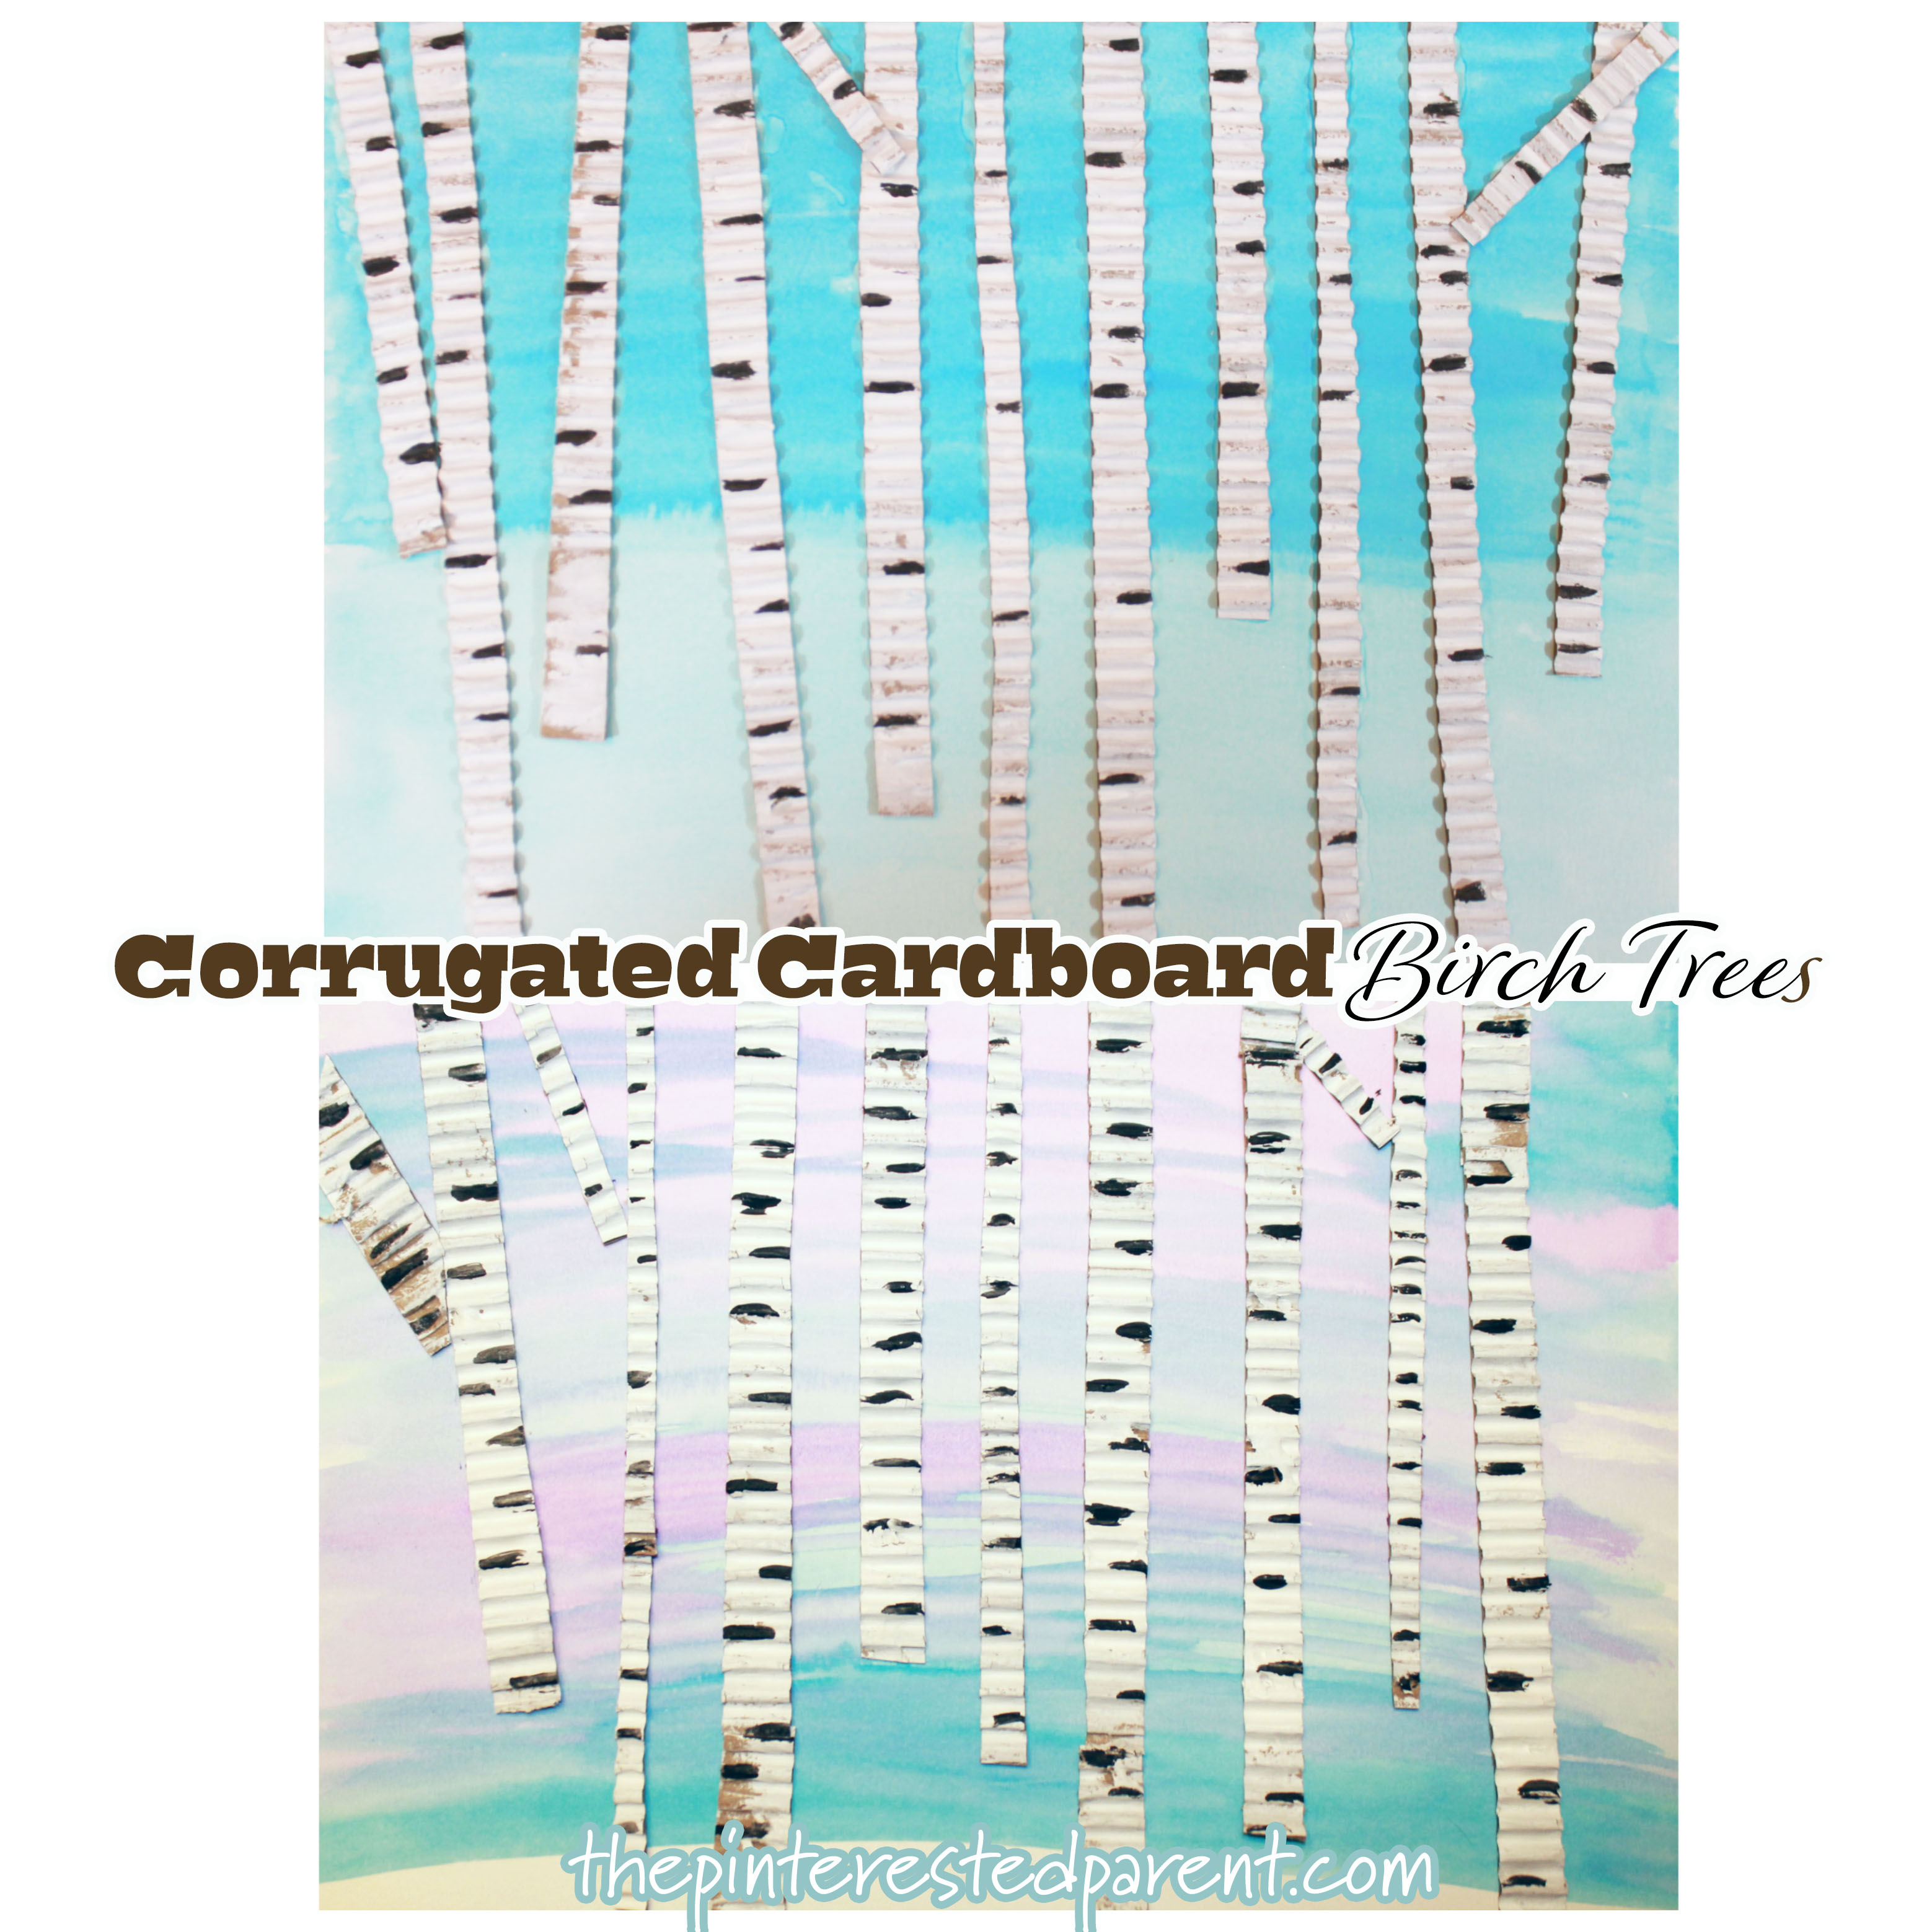 Corrugated Cardboard Birch Trees. Mixed media art for the kids. Winter arts and crafts